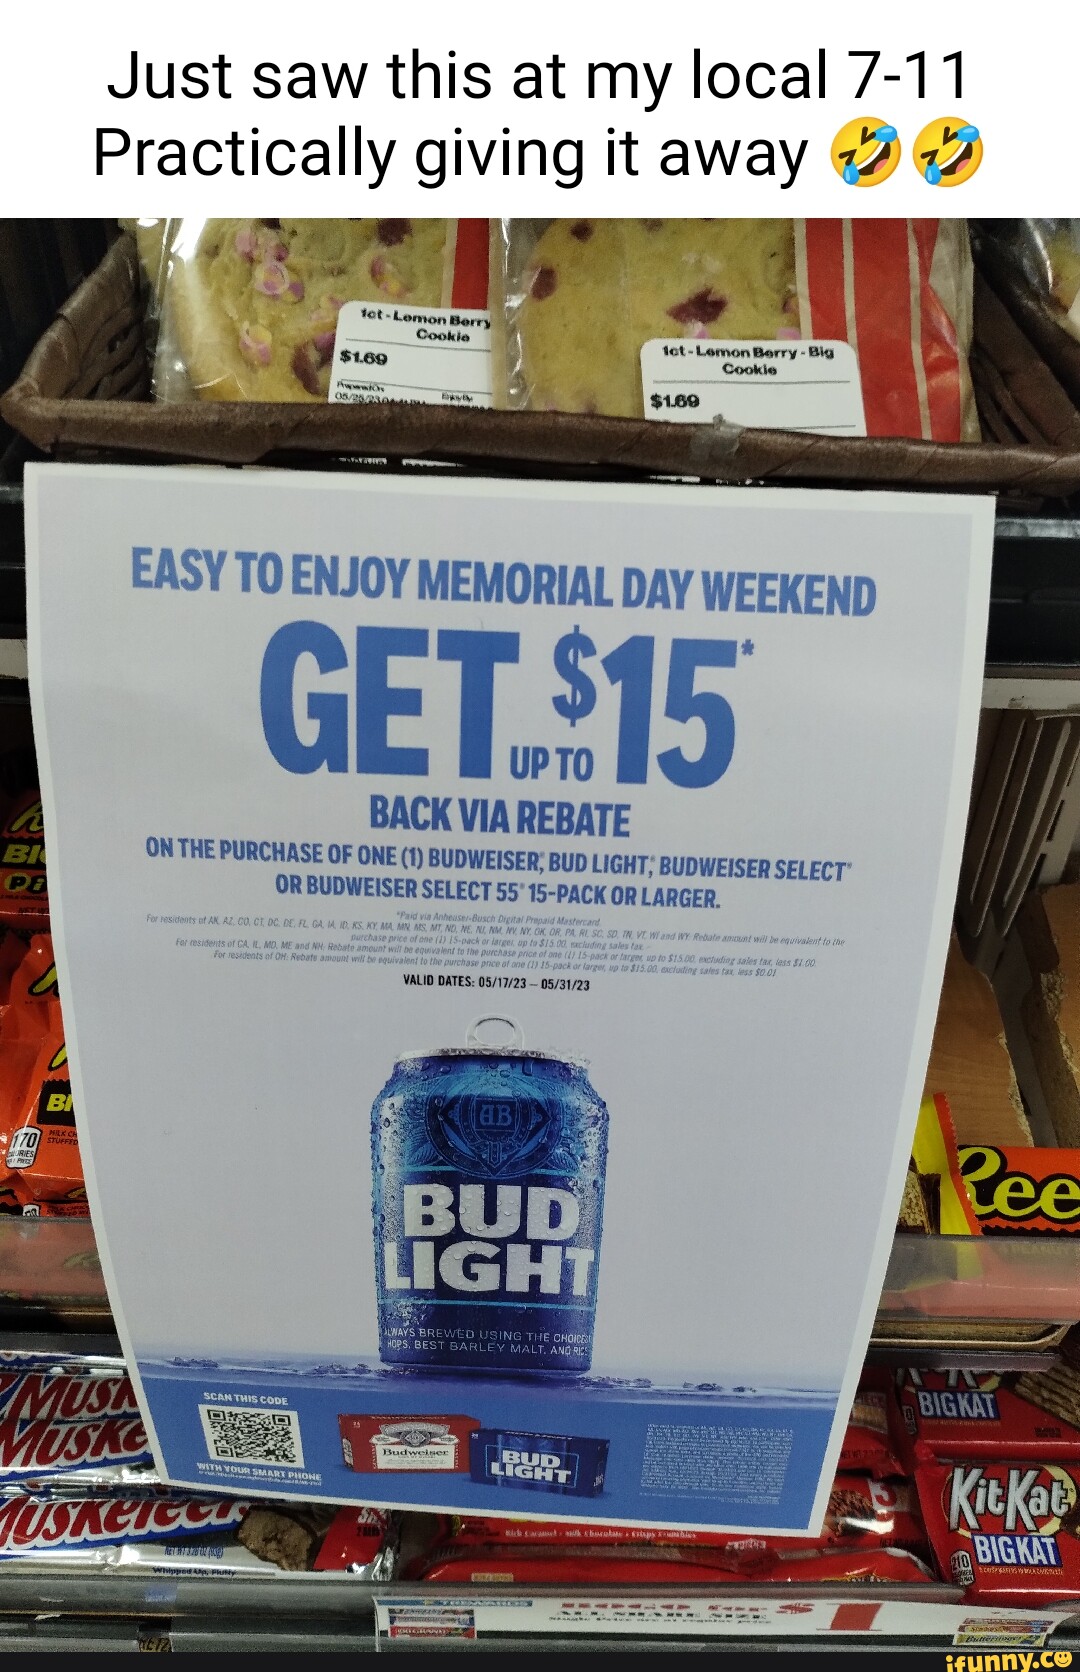 budweiser-s-may-2019-text-rebate-promotion-ac-dc-beverage